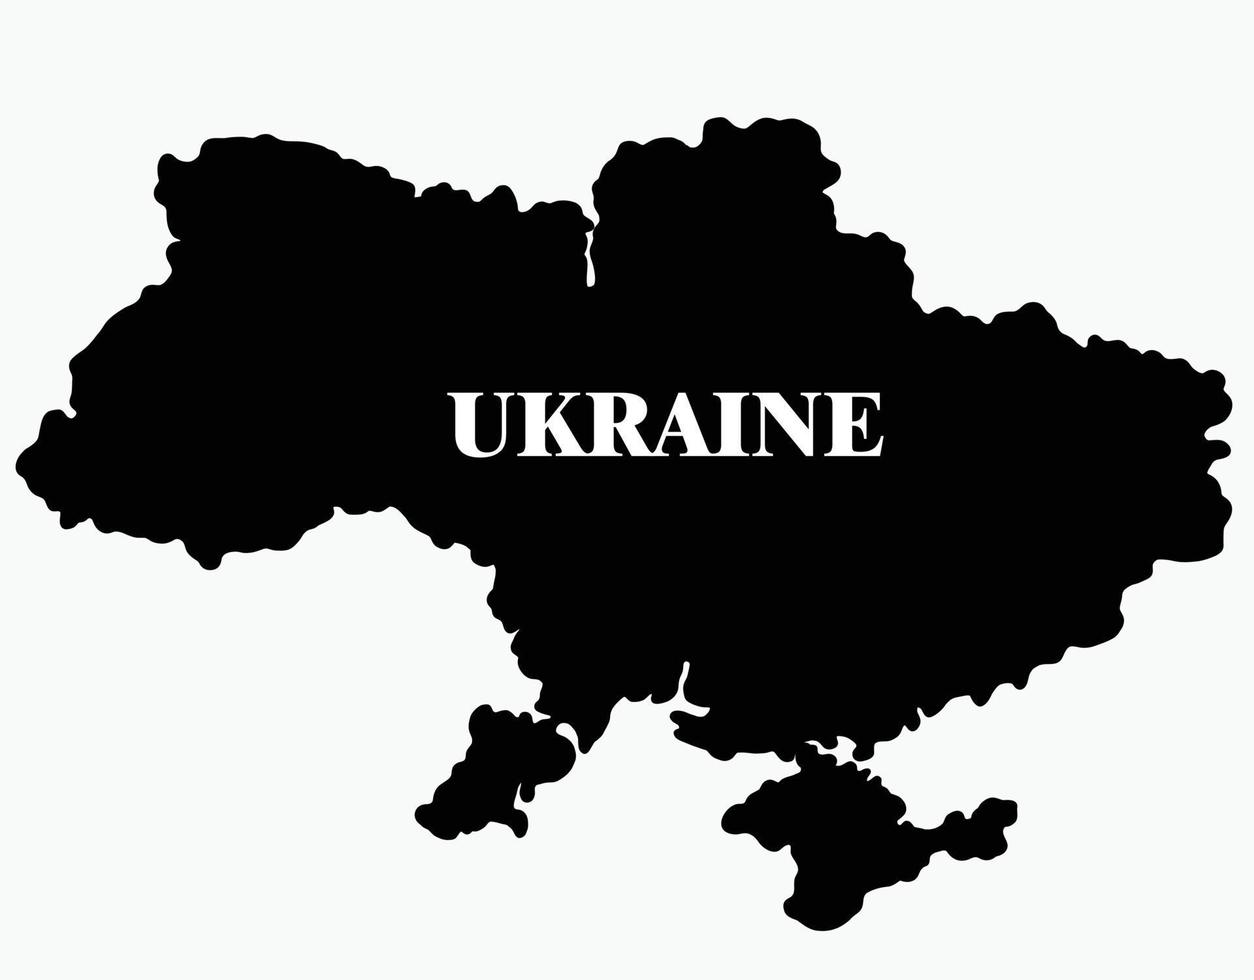 Doodle freehand drawing of Ukraine map. vector